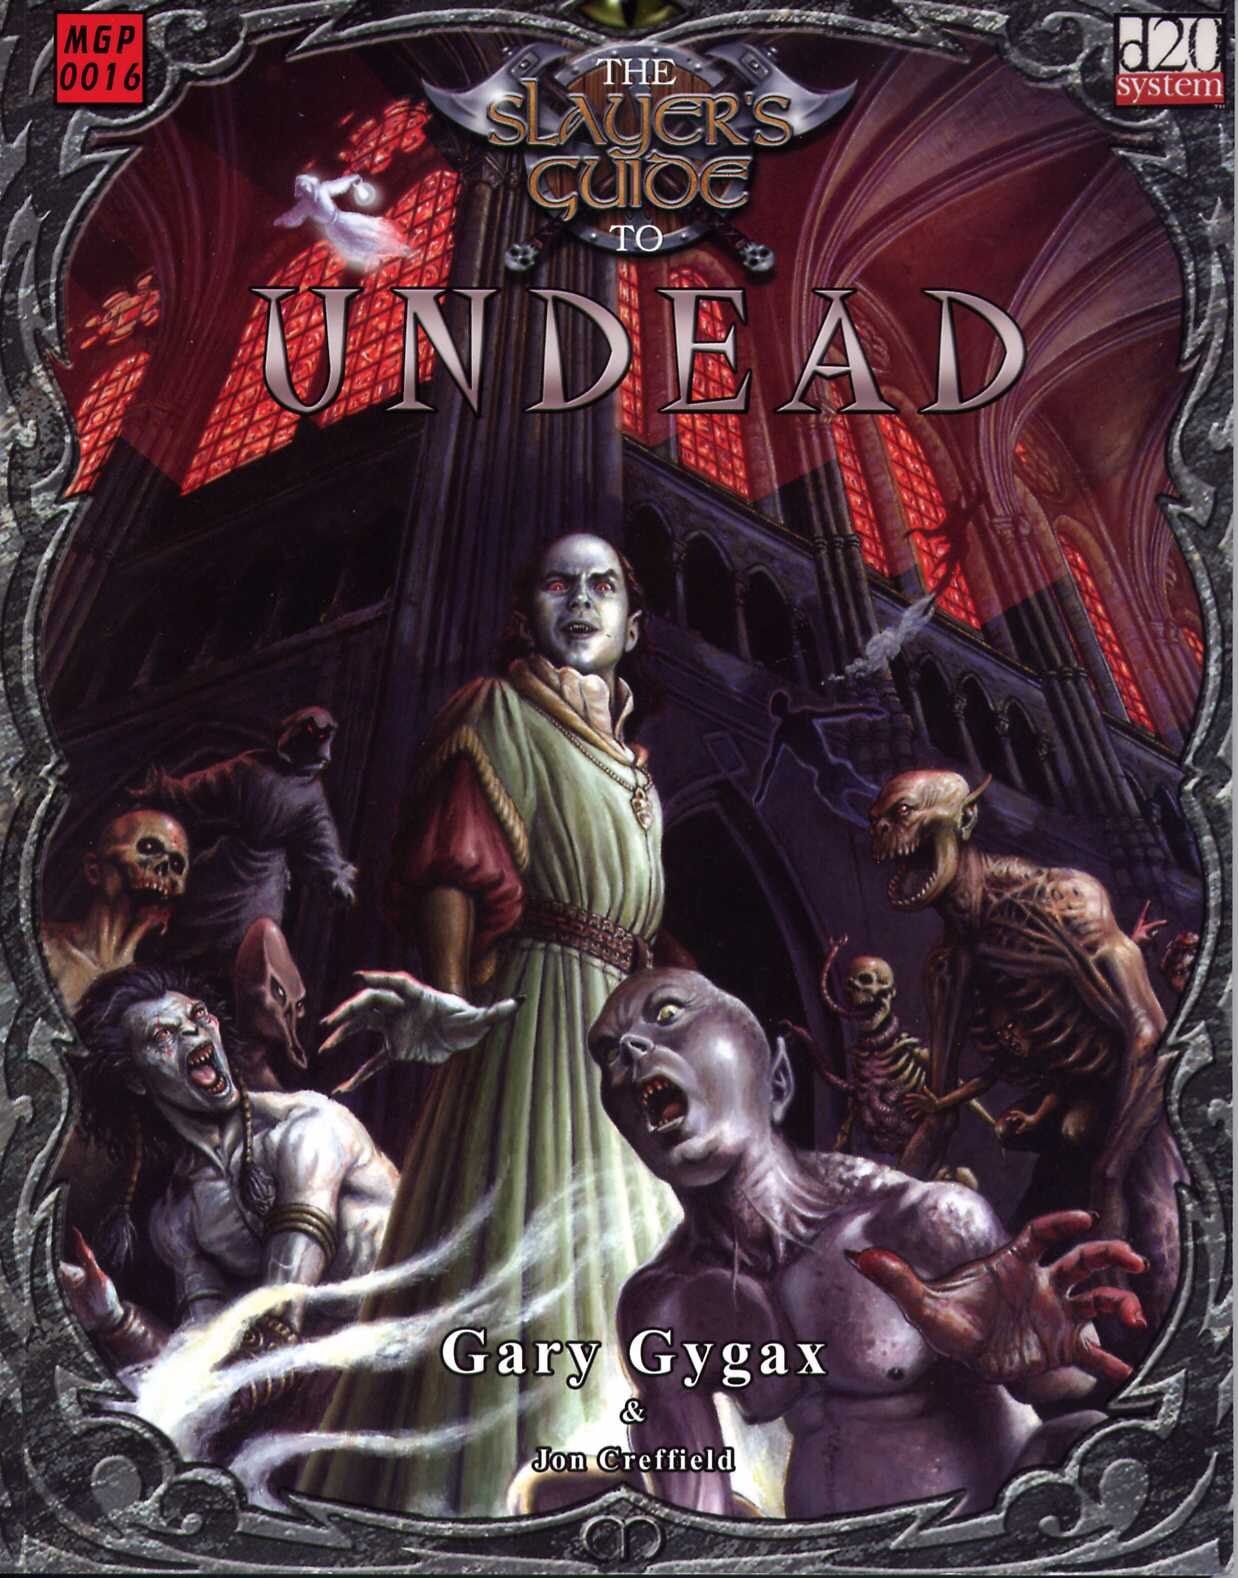 D&D3e - Slayer's Guide to Undead